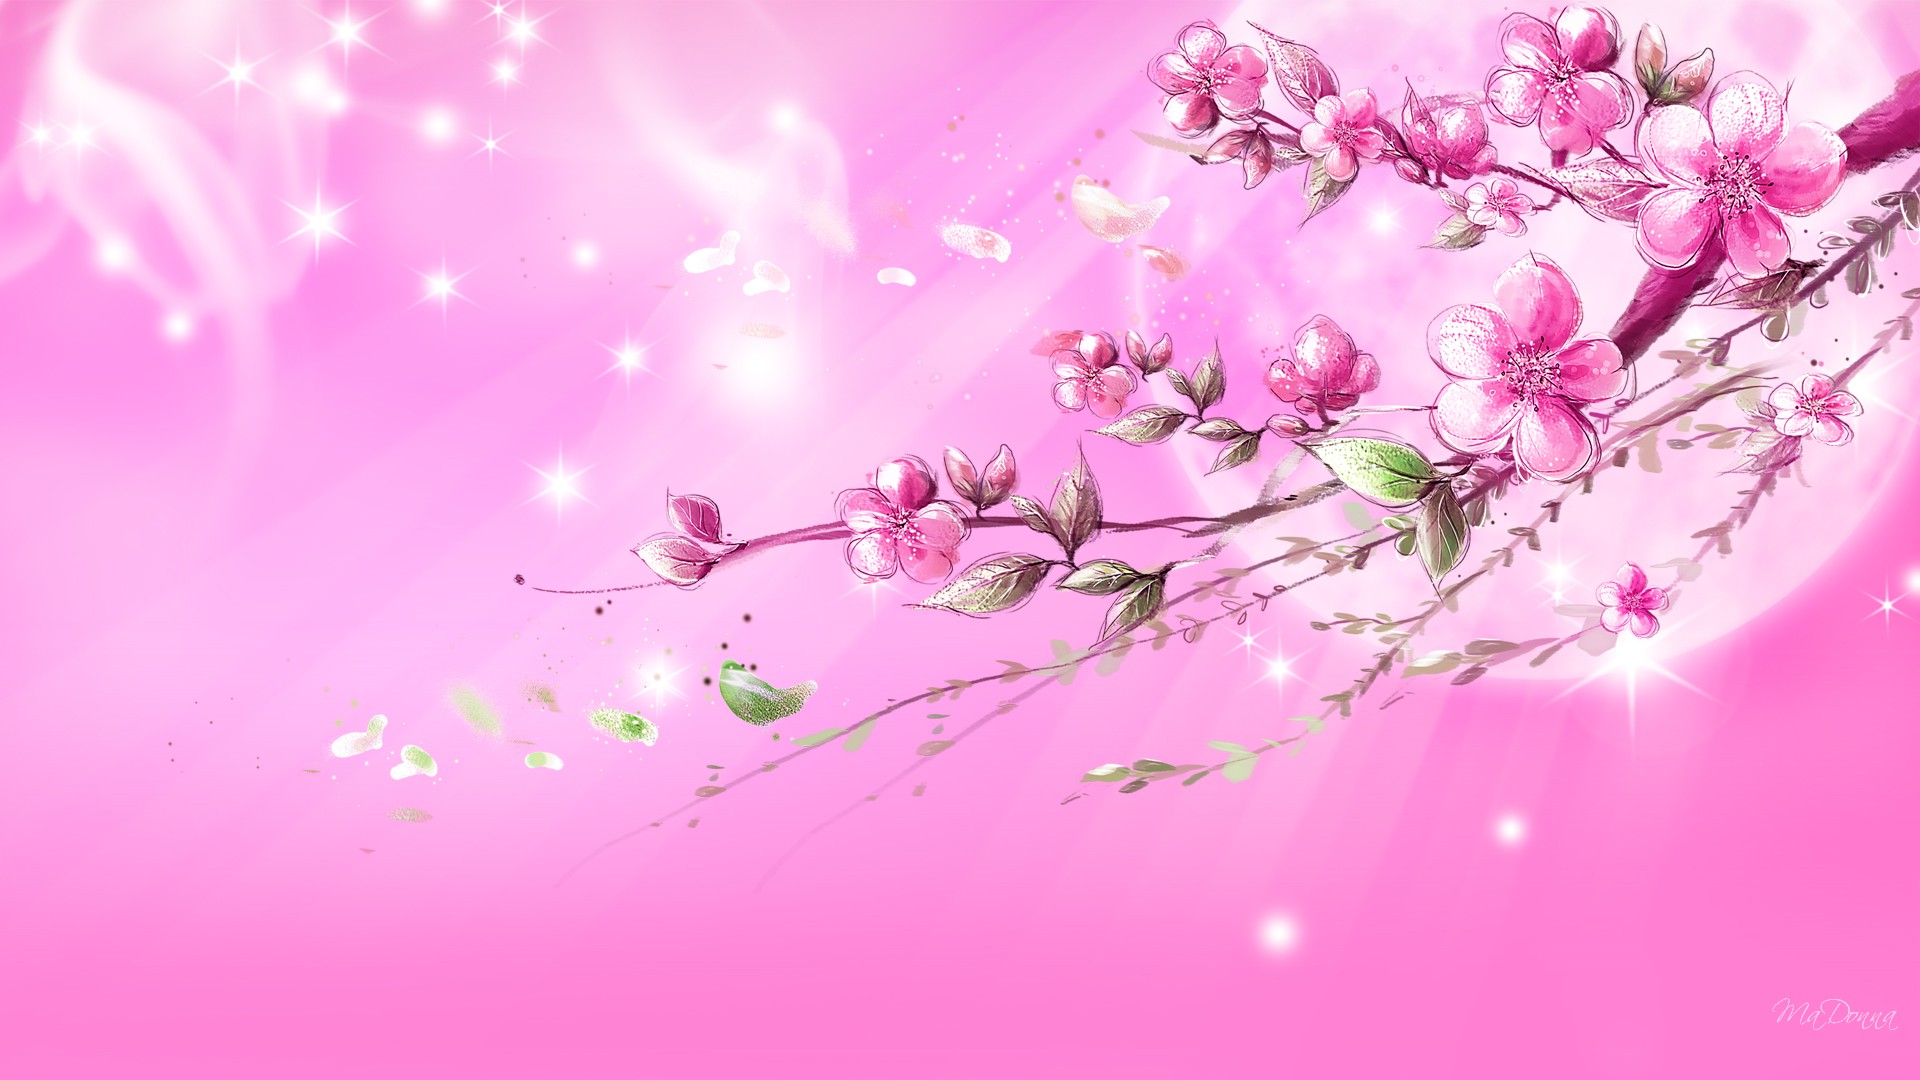 35 High Definition Pink WallpapersBackgrounds For Free